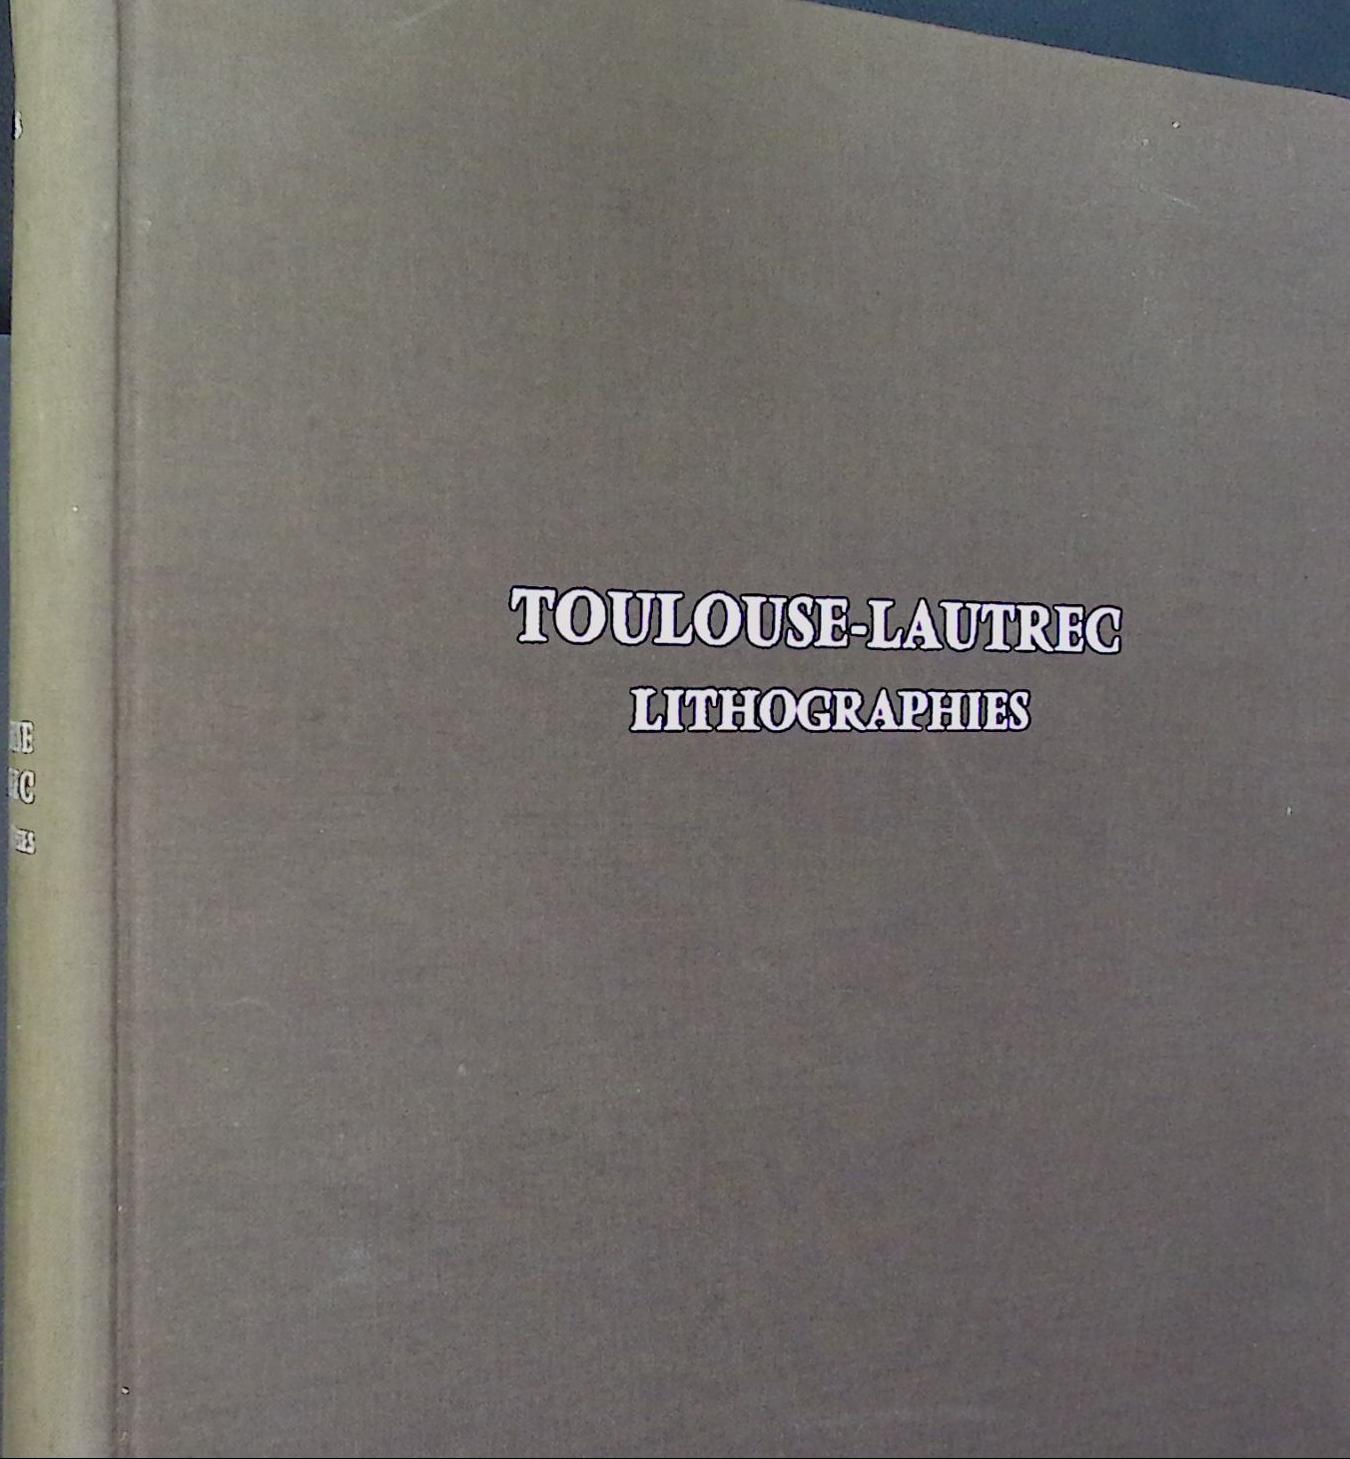 Toulouse-Lautrec: Lithographies - Pointes Sches. [Complete works]